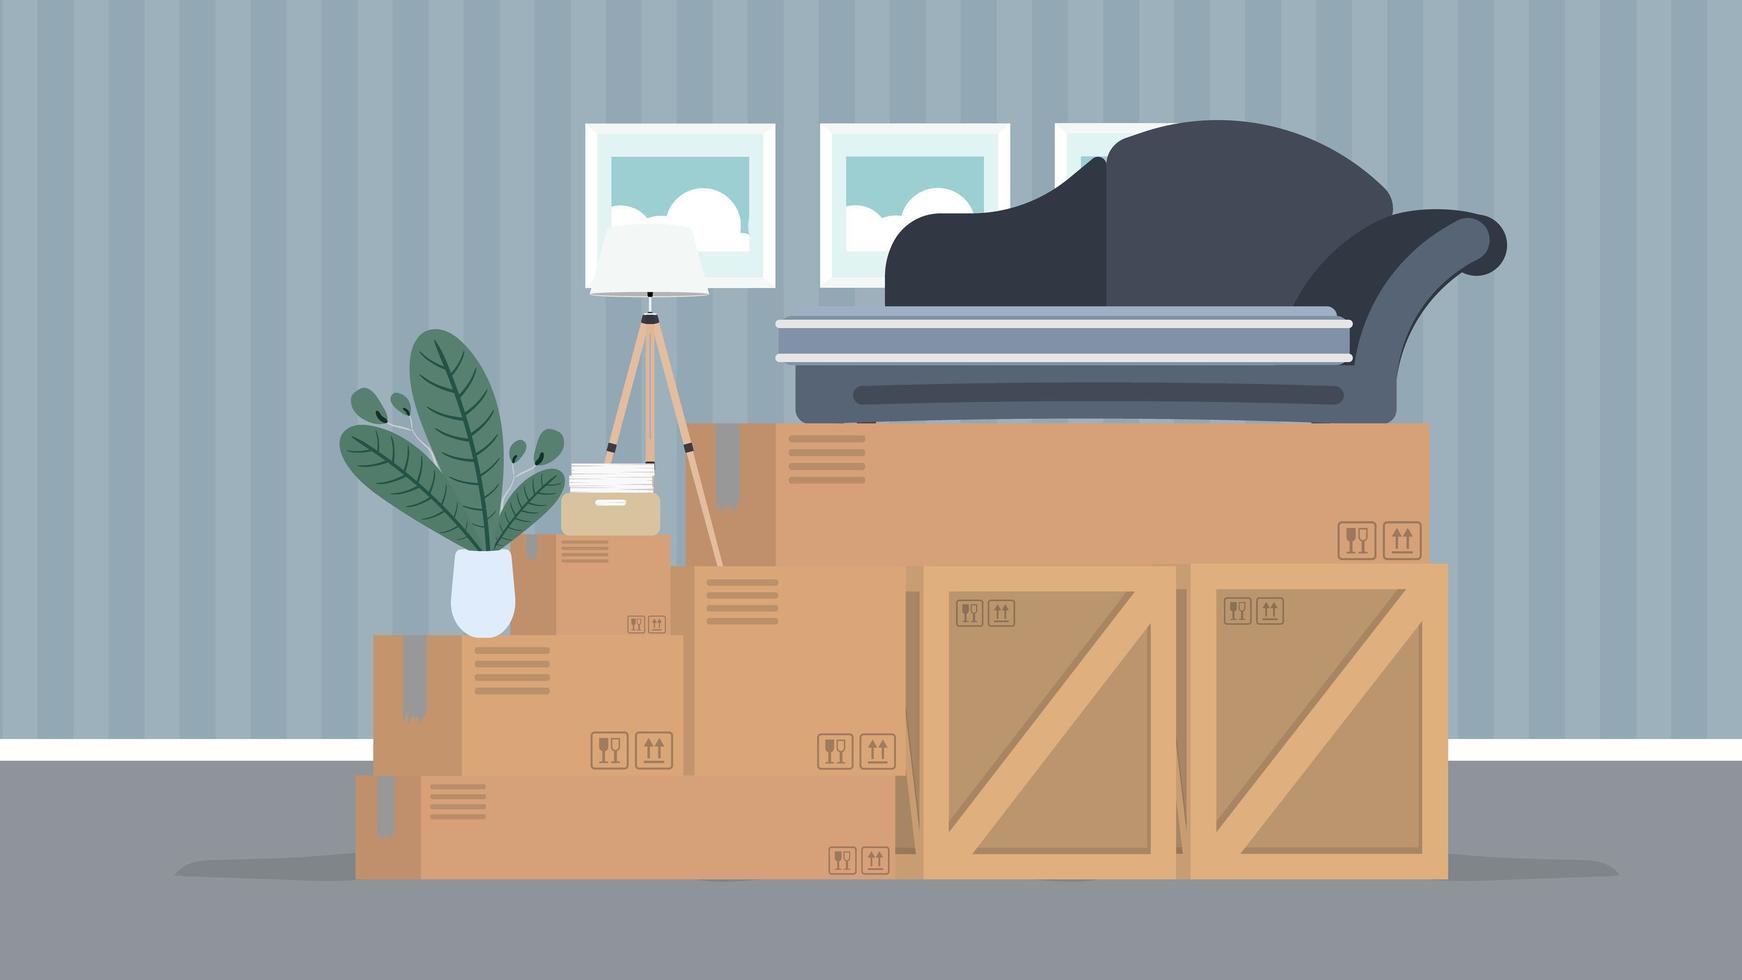 Moving home banner. Moving to a new place. Wooden boxes, cardboard boxes, sofa, houseplant, floor lamp. vector